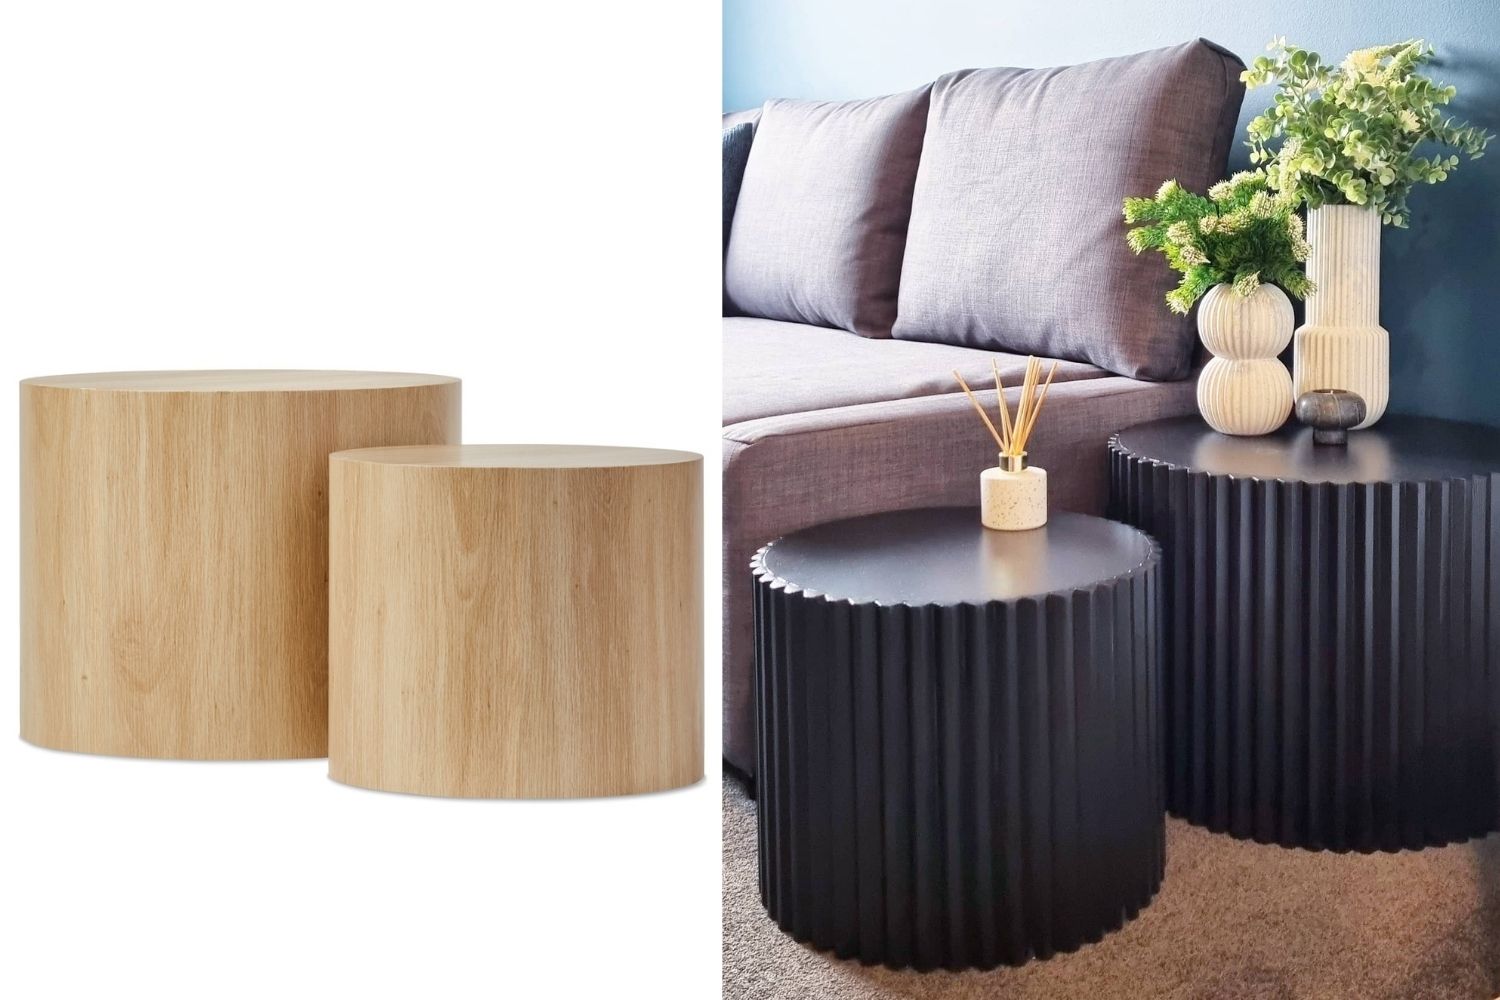 Downtown globaal verraad How to make stunning fluted side tables with Kmart items | Better Homes and  Gardens